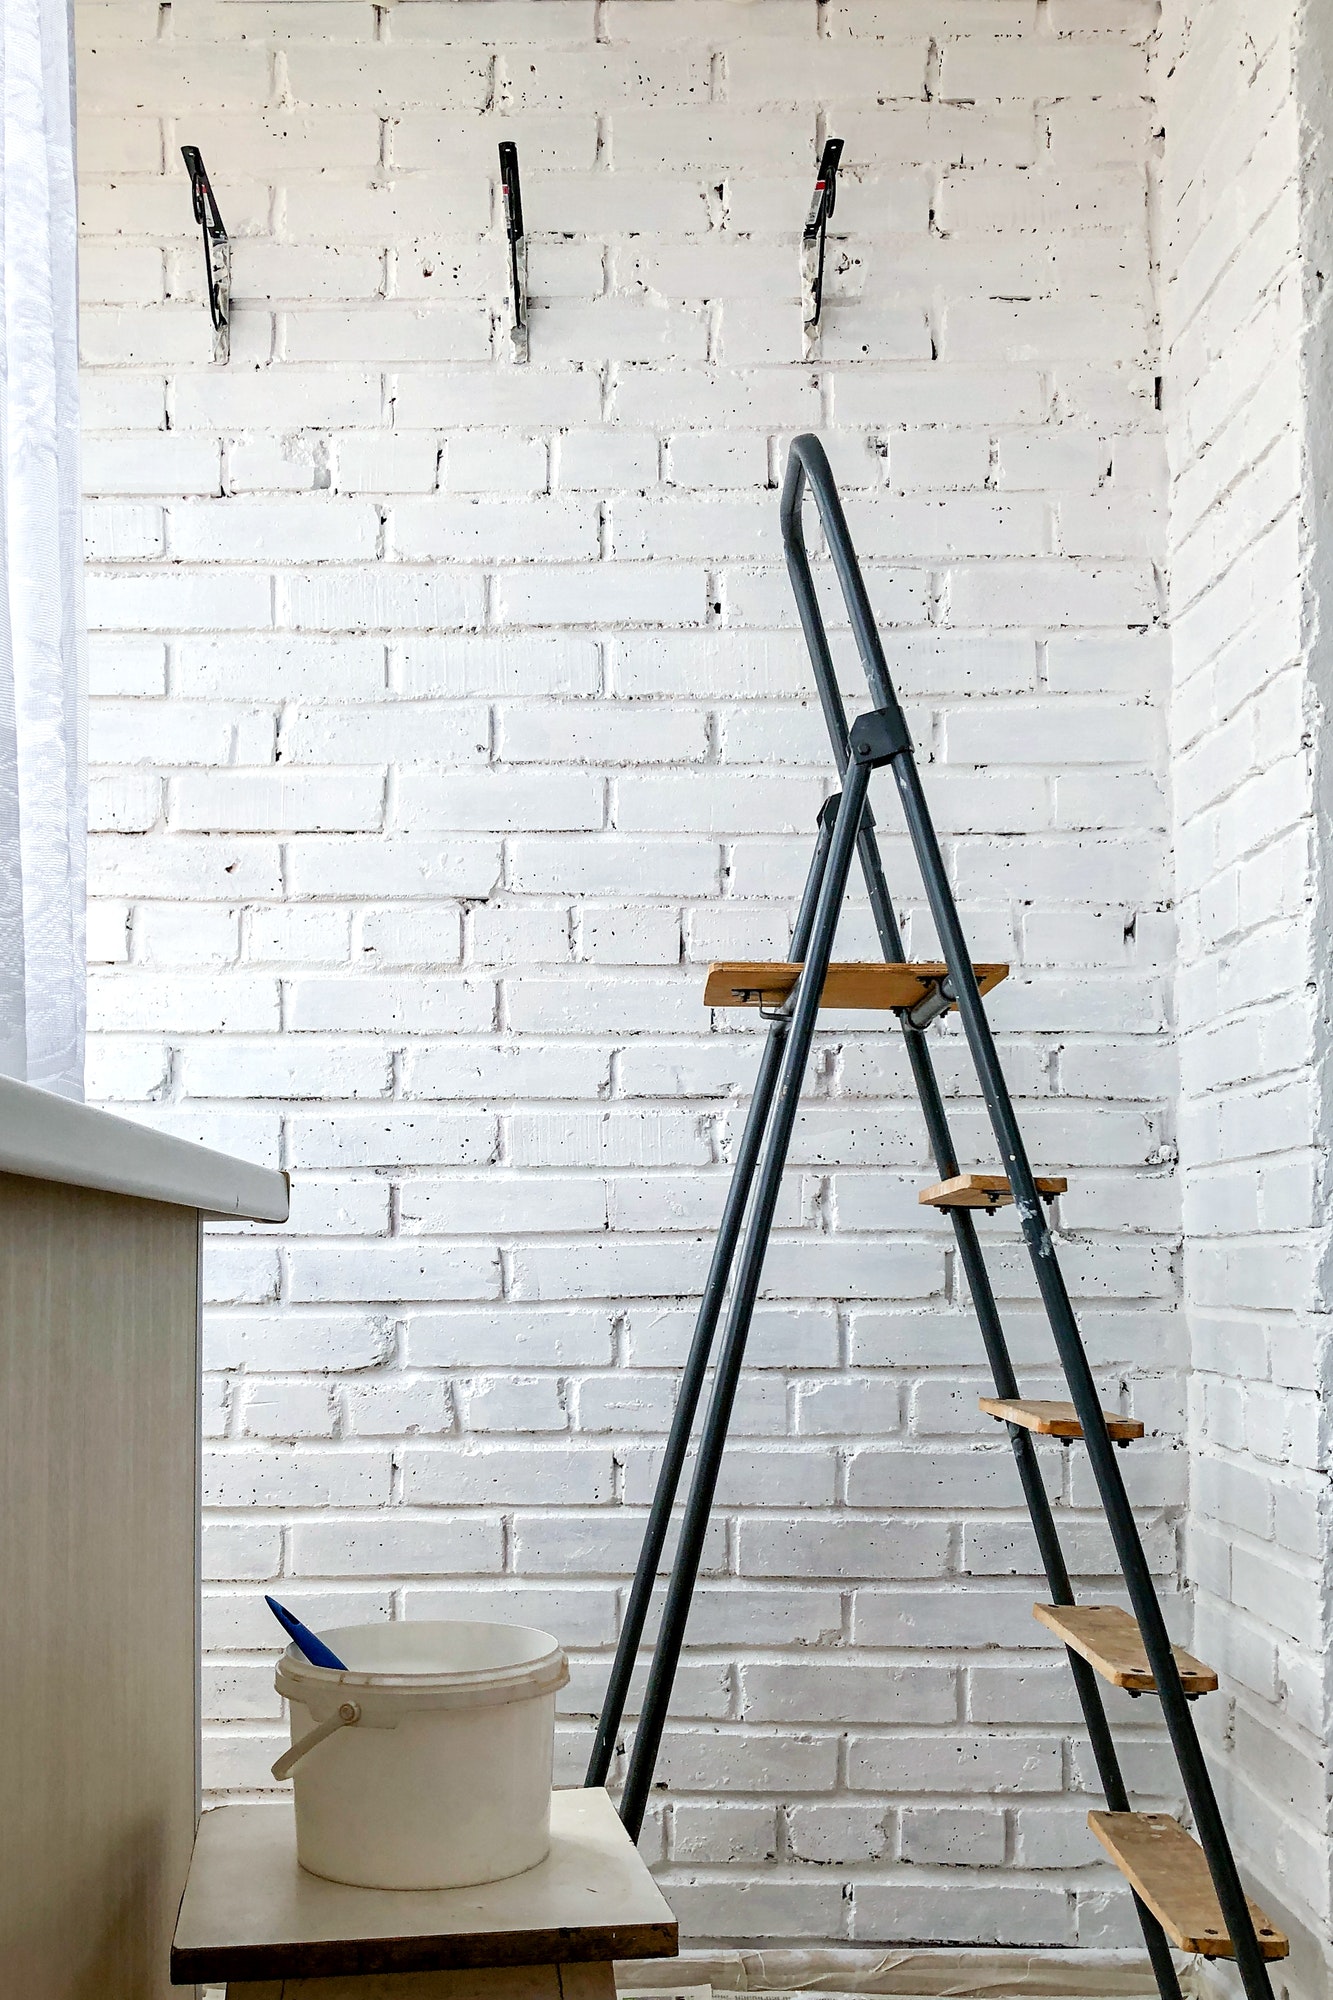 Home renovation. Stepladder stands neat brick wall painted in white